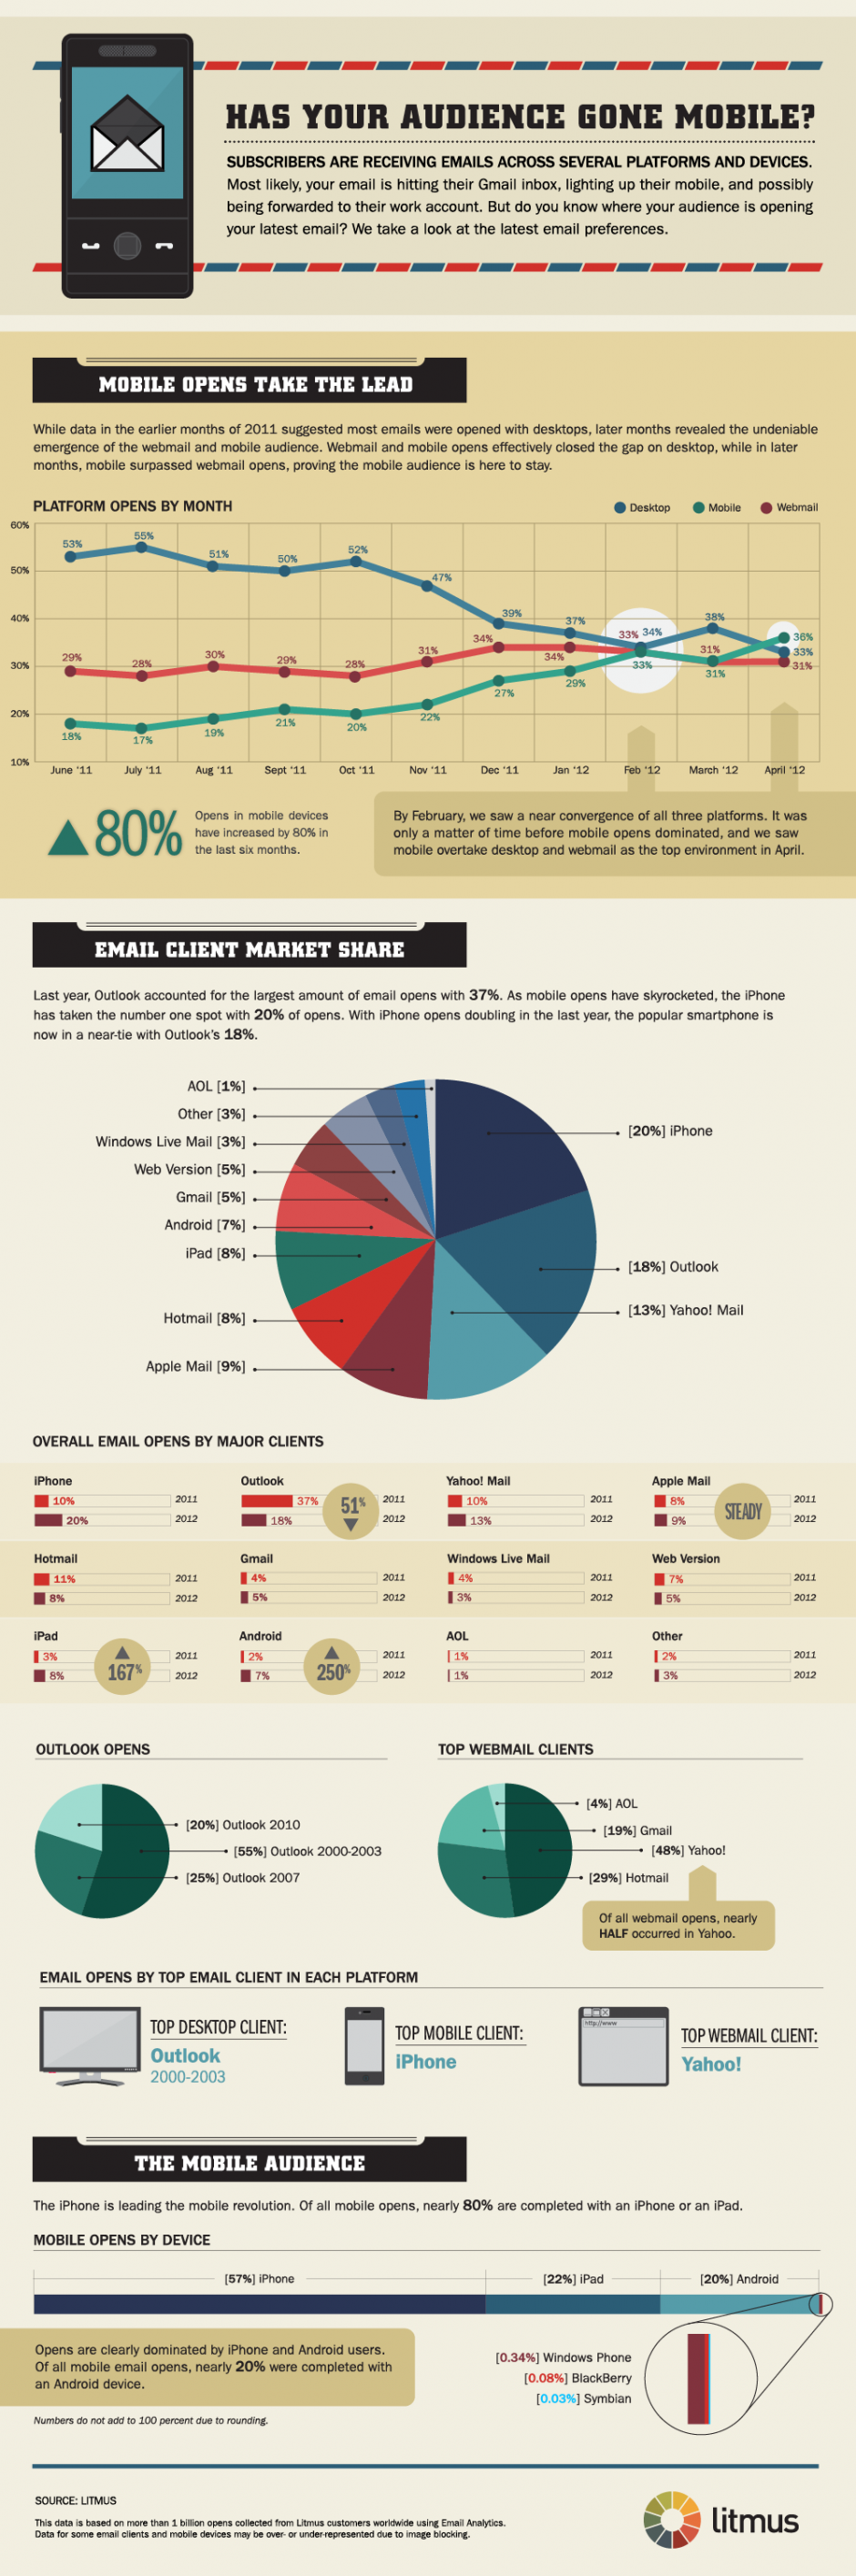 Email-client-market-share-june-2012-940x2830